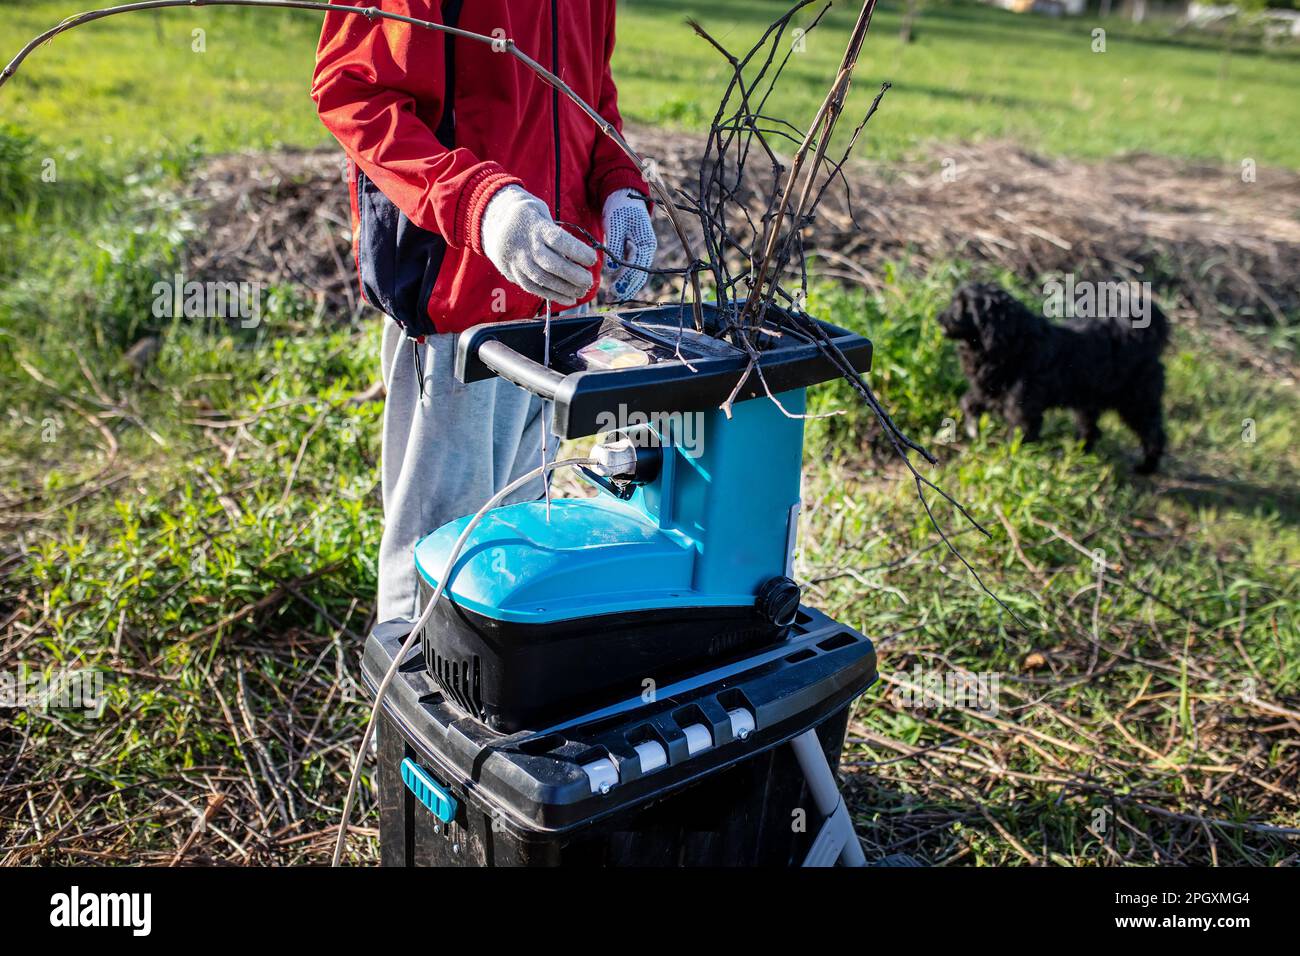 Spring cleaning in the garden. Gardener putting dry branches in a garden grinder or wood chopper for chopping trees Stock Photo